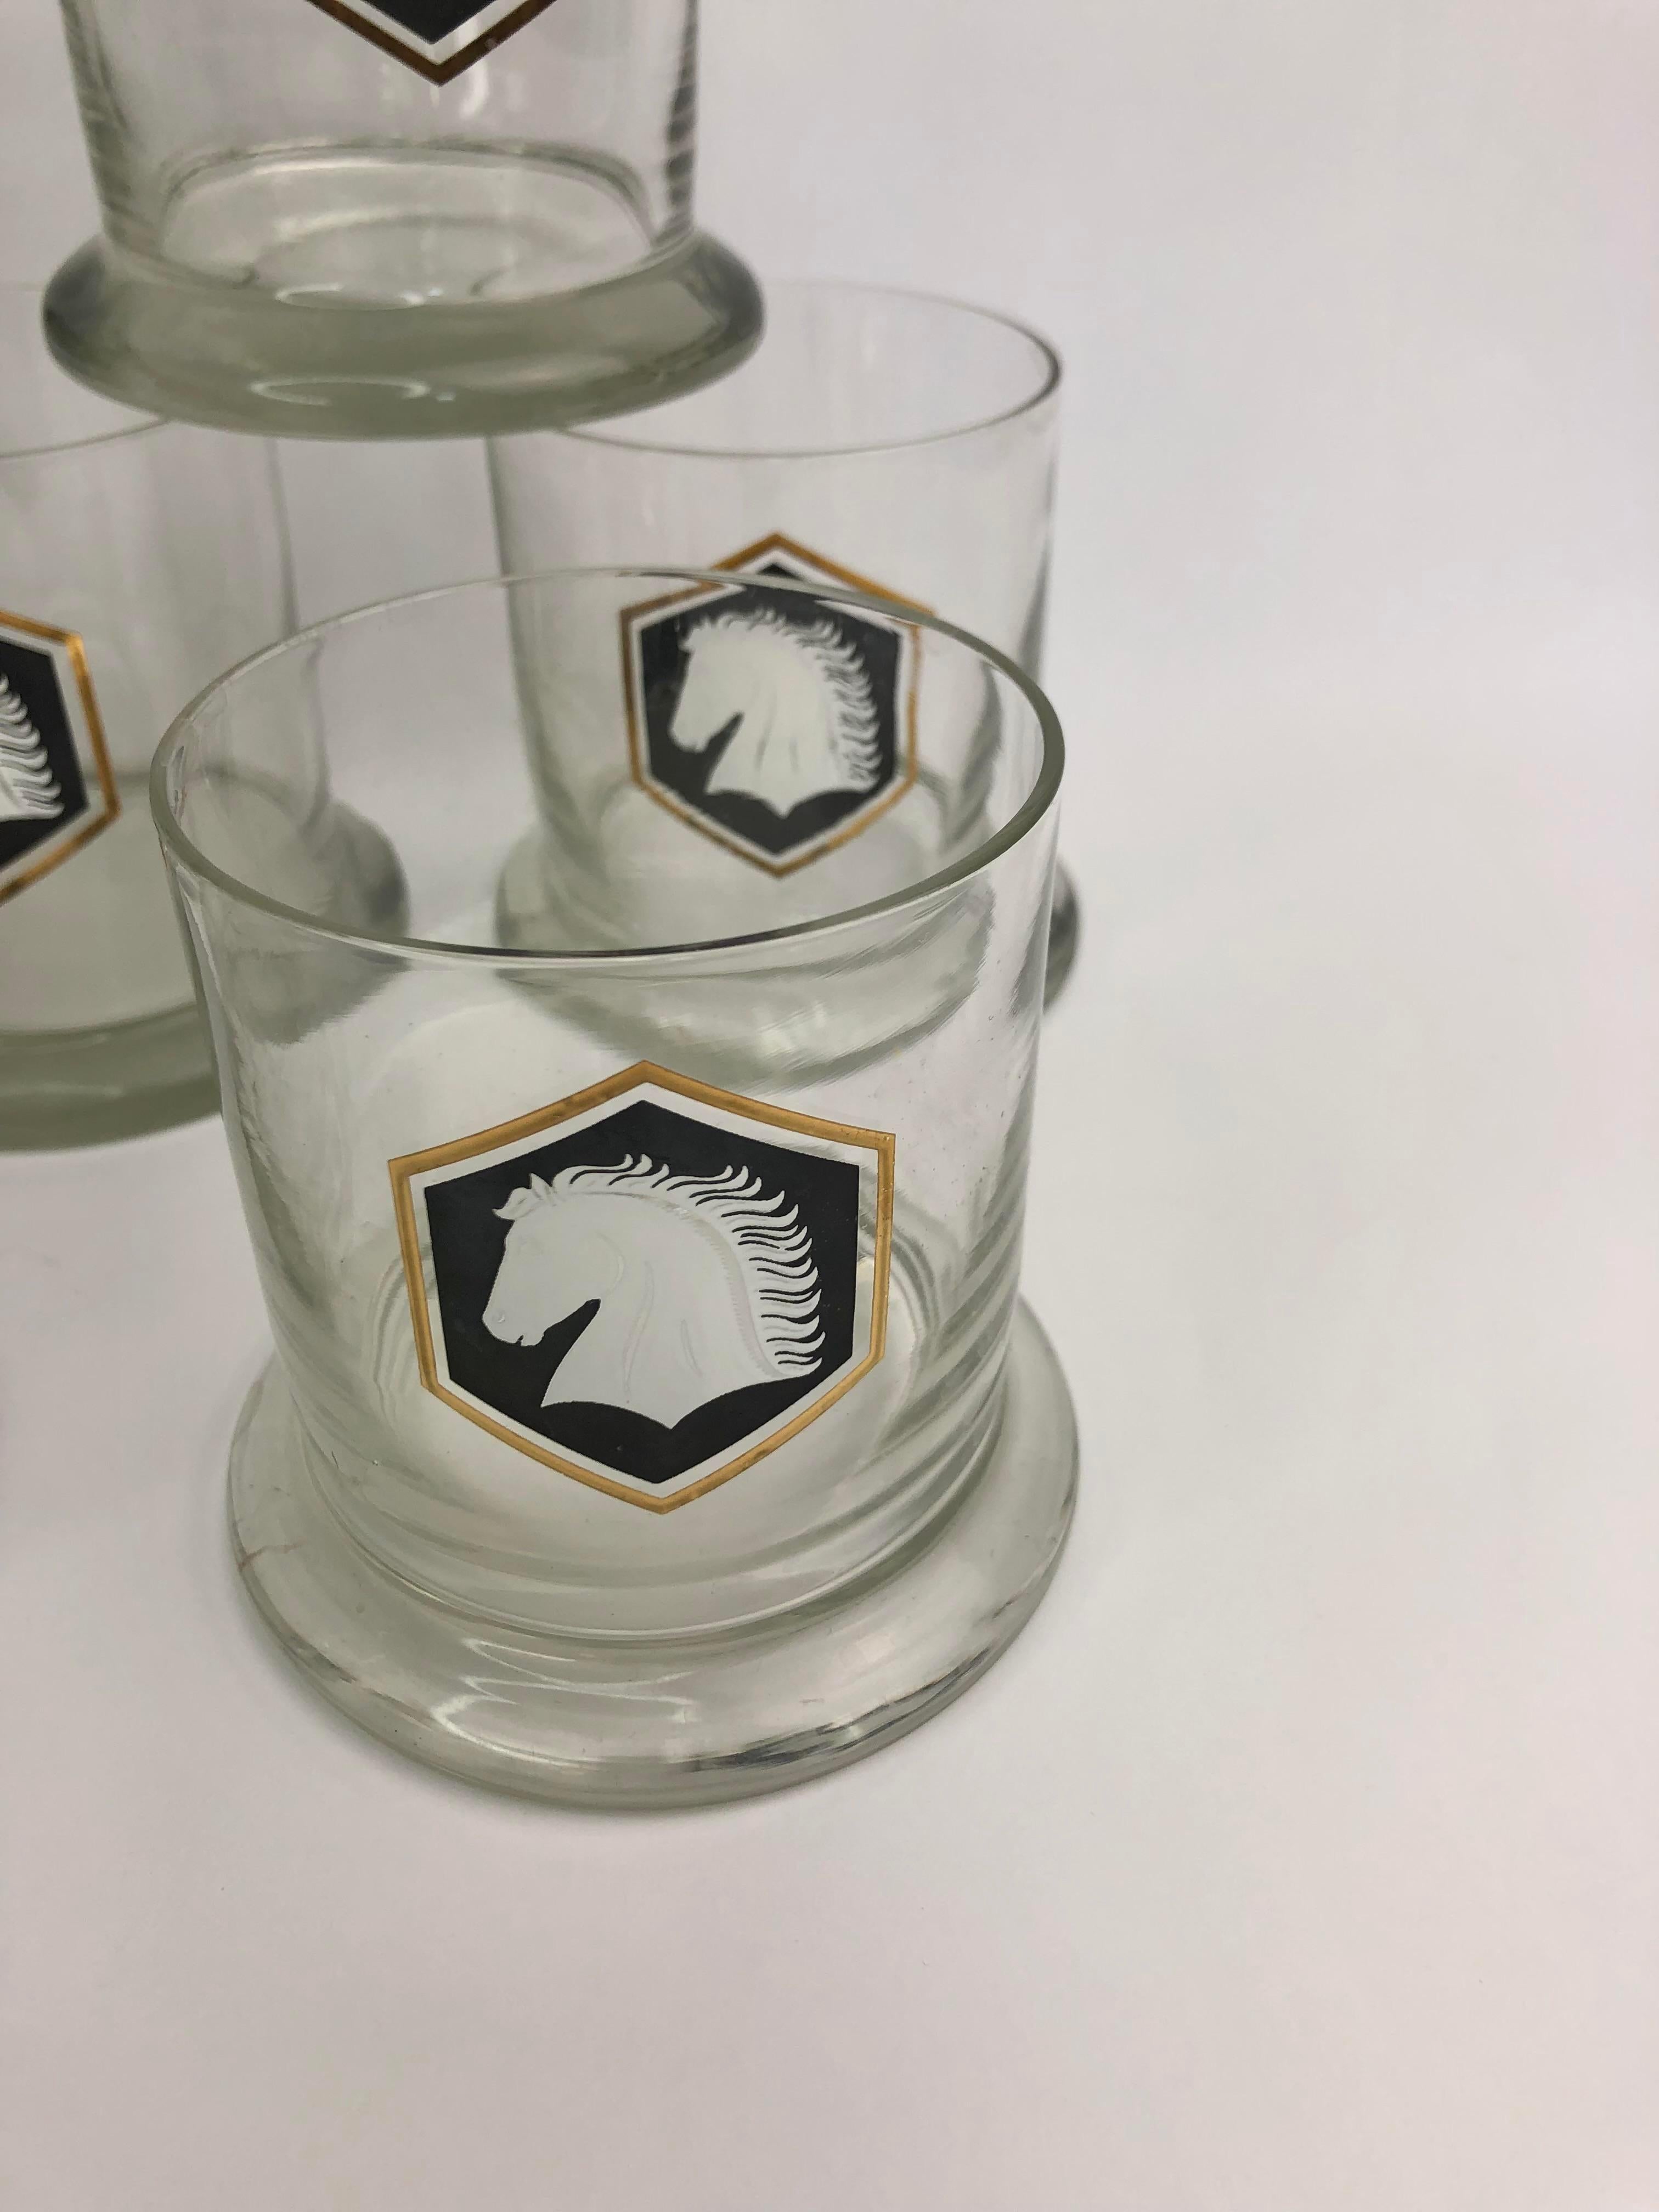 Set of 8 Vintage Horses Rocks Glasses. Unusual form with an extra thick base. Each glass with a white horse head on a black background trimmed in 22 carat gold. All are in excellent vintage condition